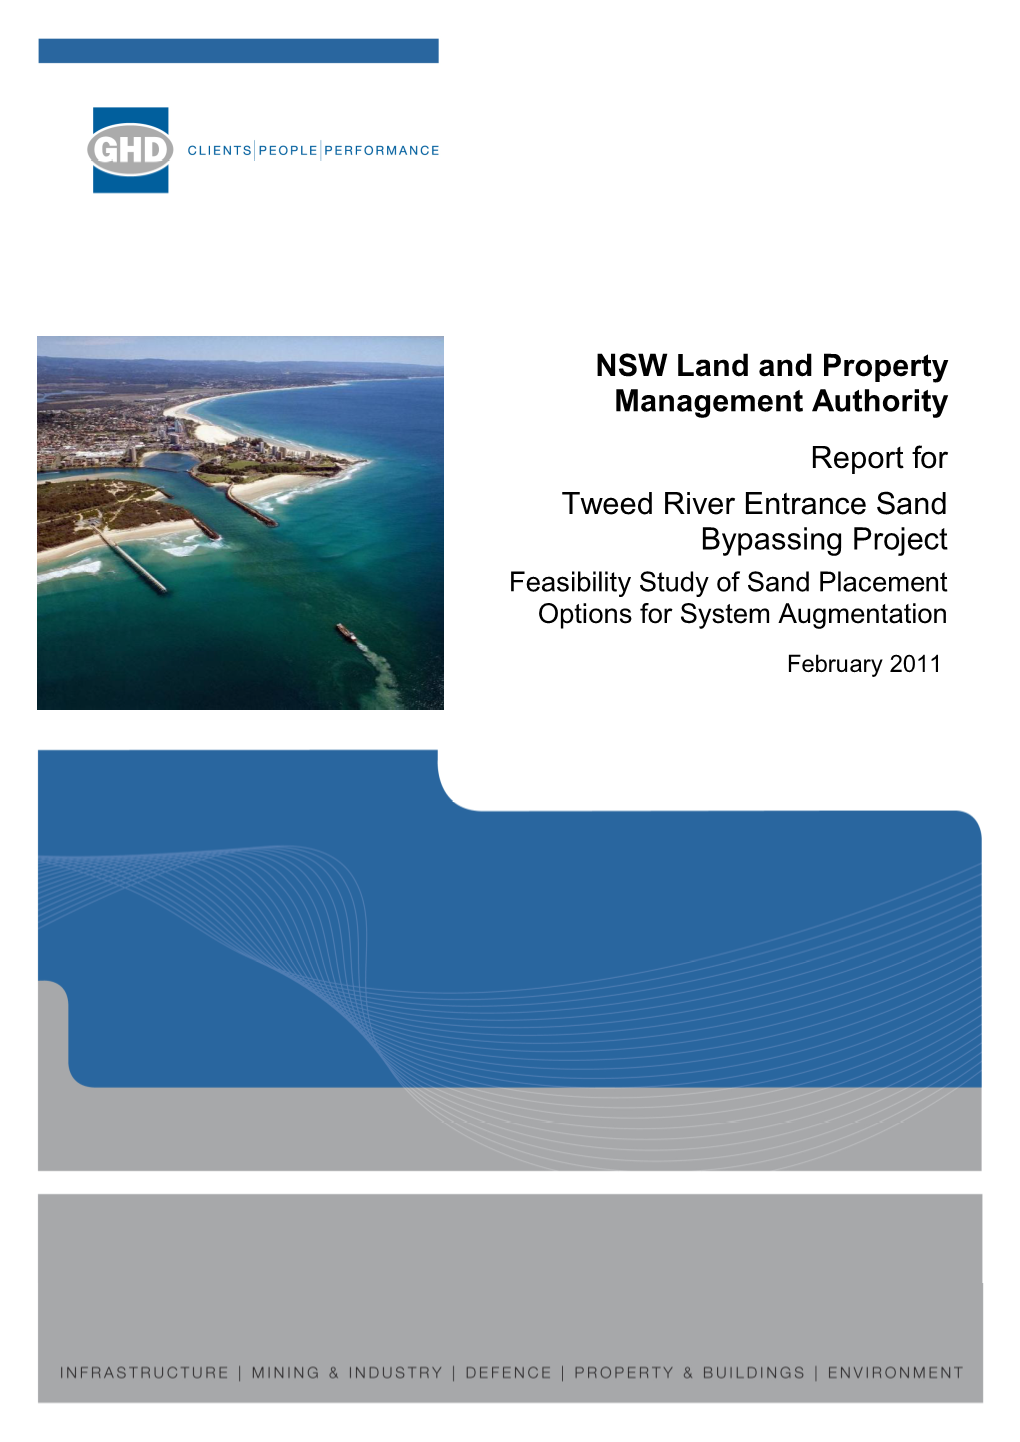 NSW Land and Property Management Authority Report for Tweed River Entrance Sand Bypassing Project Feasibility Study of Sand Placement Options for System Augmentation